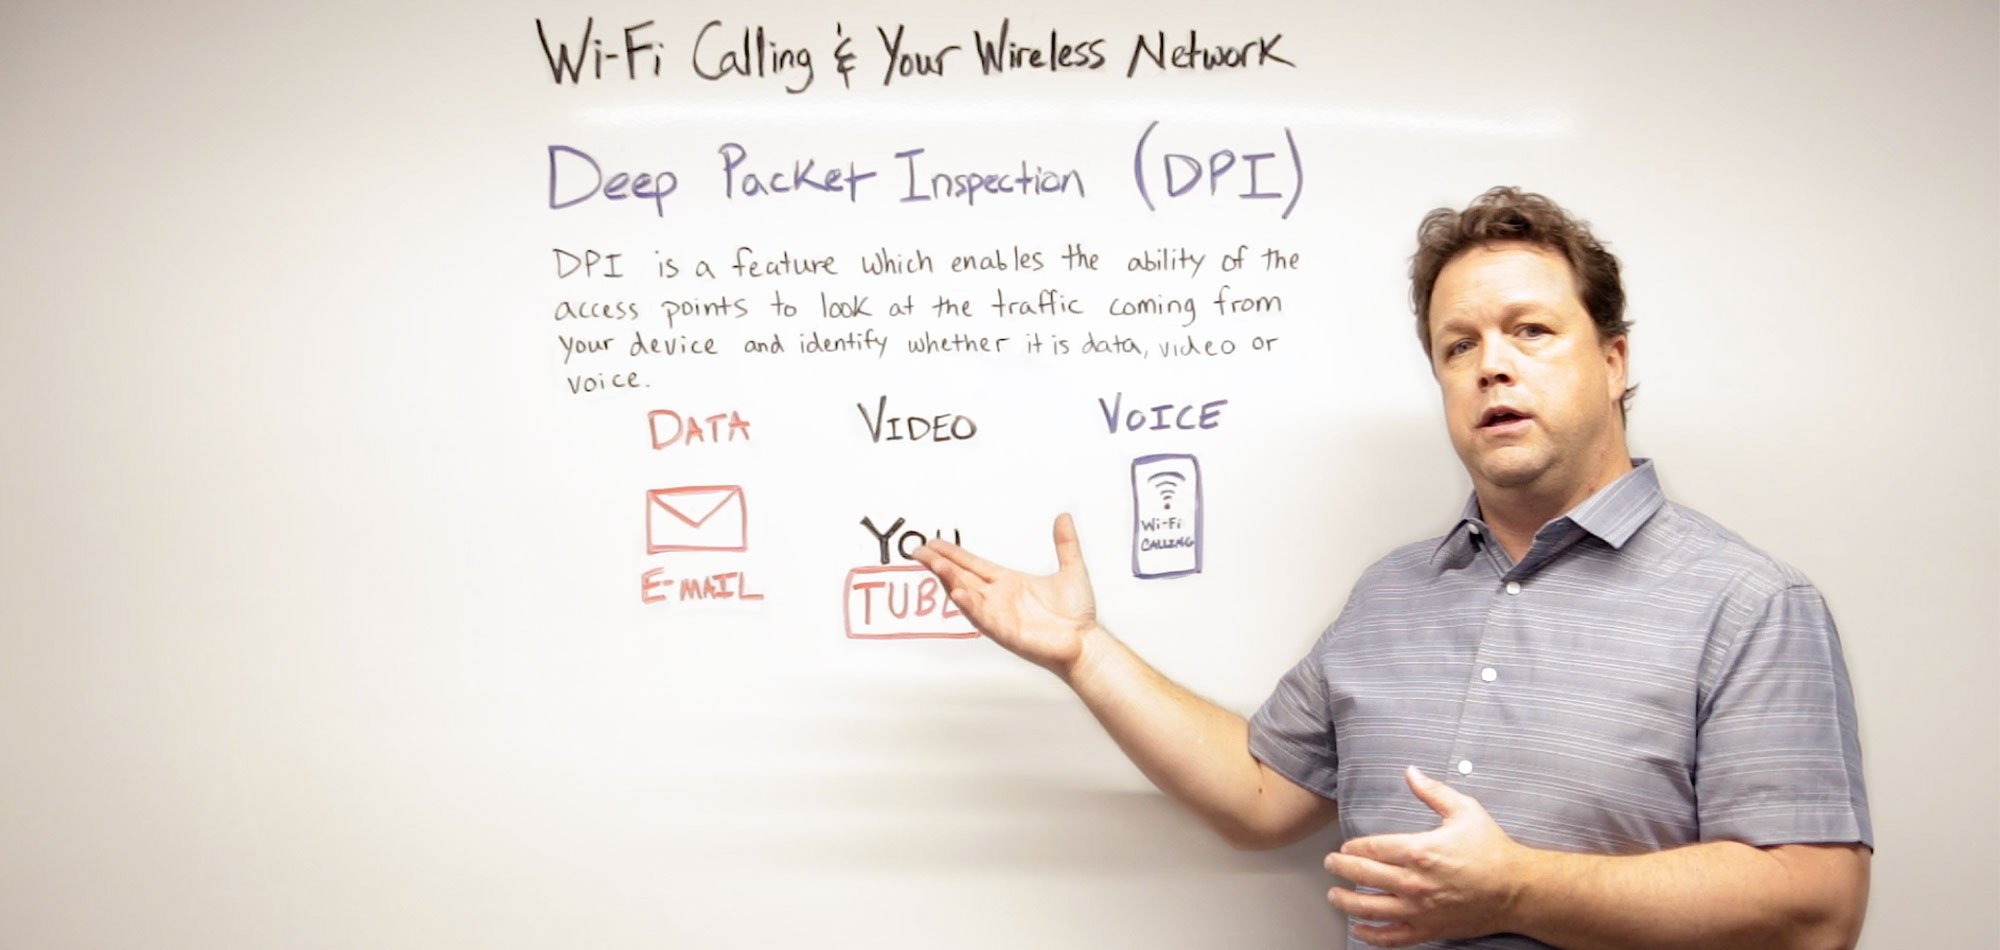 wifi calling and your wireless network part 2 whiteboard wednesday wlan design tips